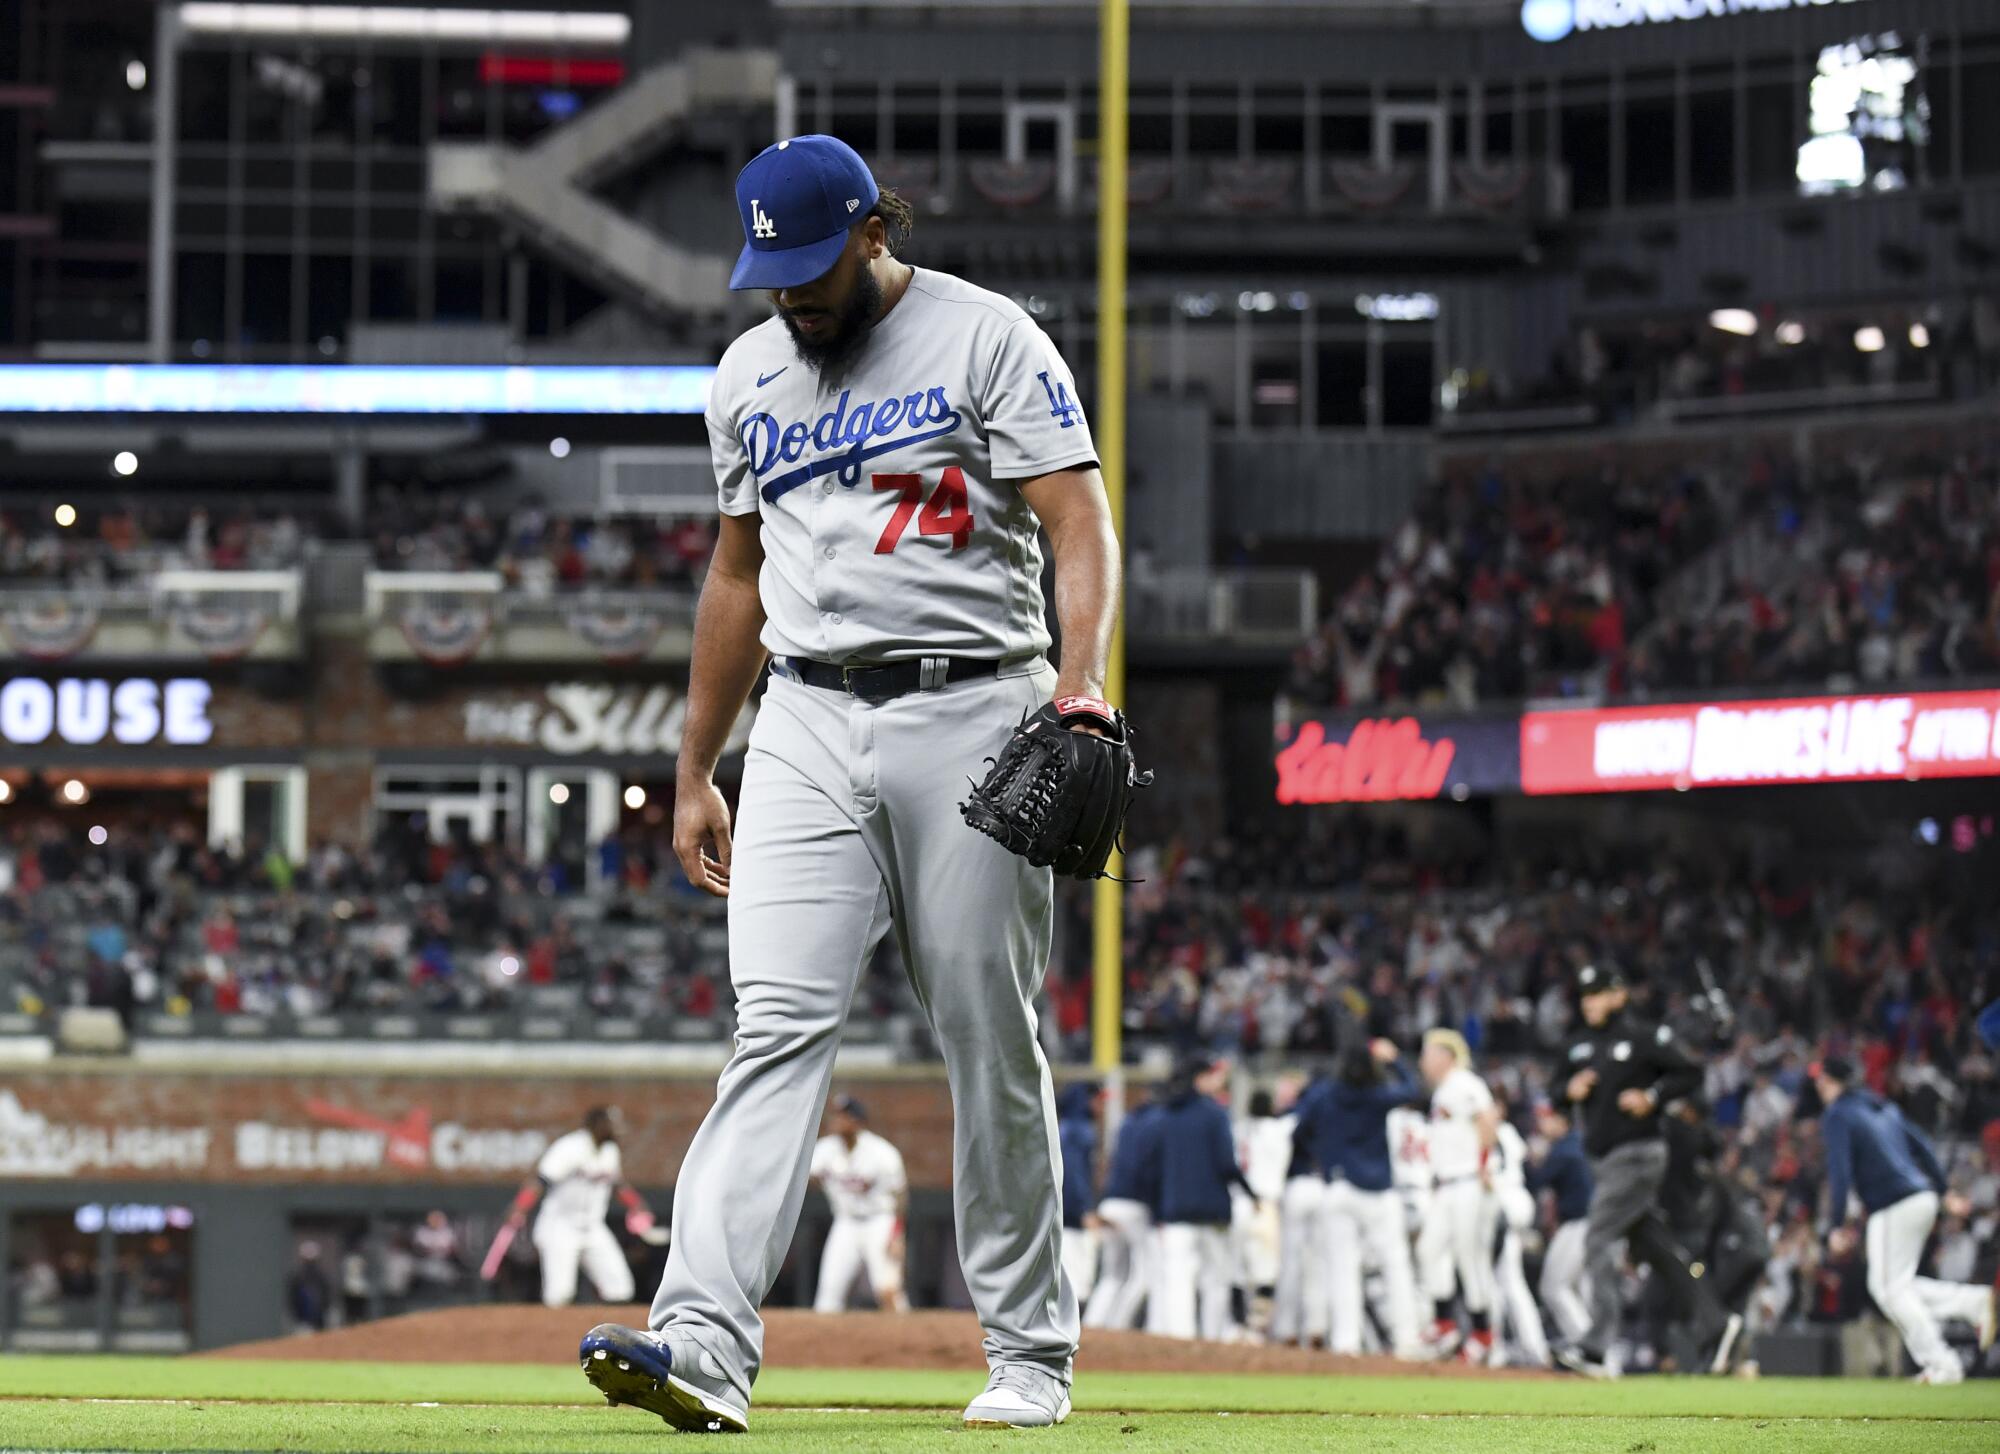 Dodgers relief pitcher Kenley Jansen walks off the field after allowing a walk-off single to Braves' Eddie Rosario